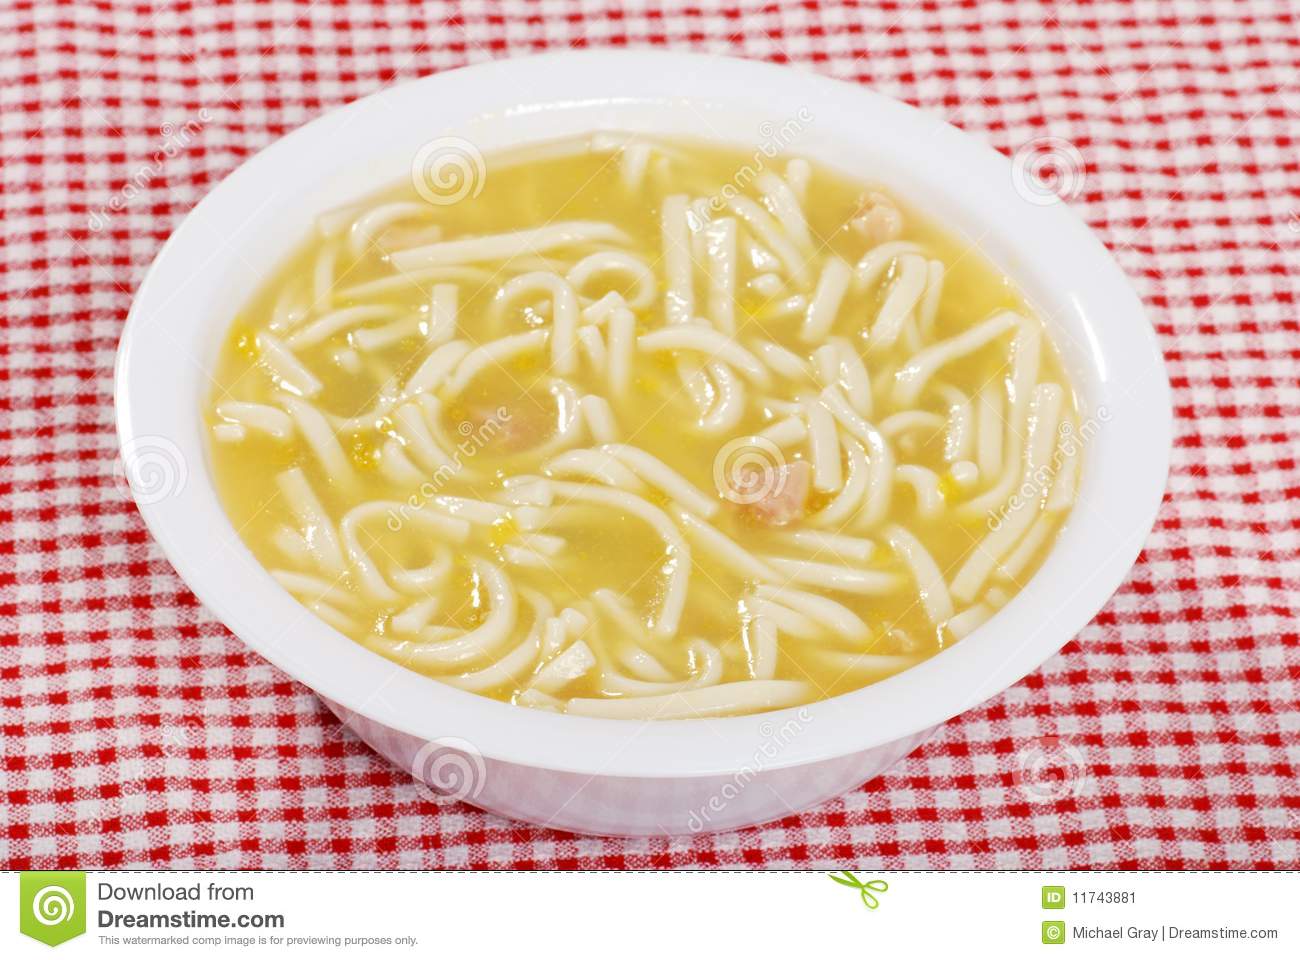 Chicken Noodle Soup On A Red And White Tablecloth 